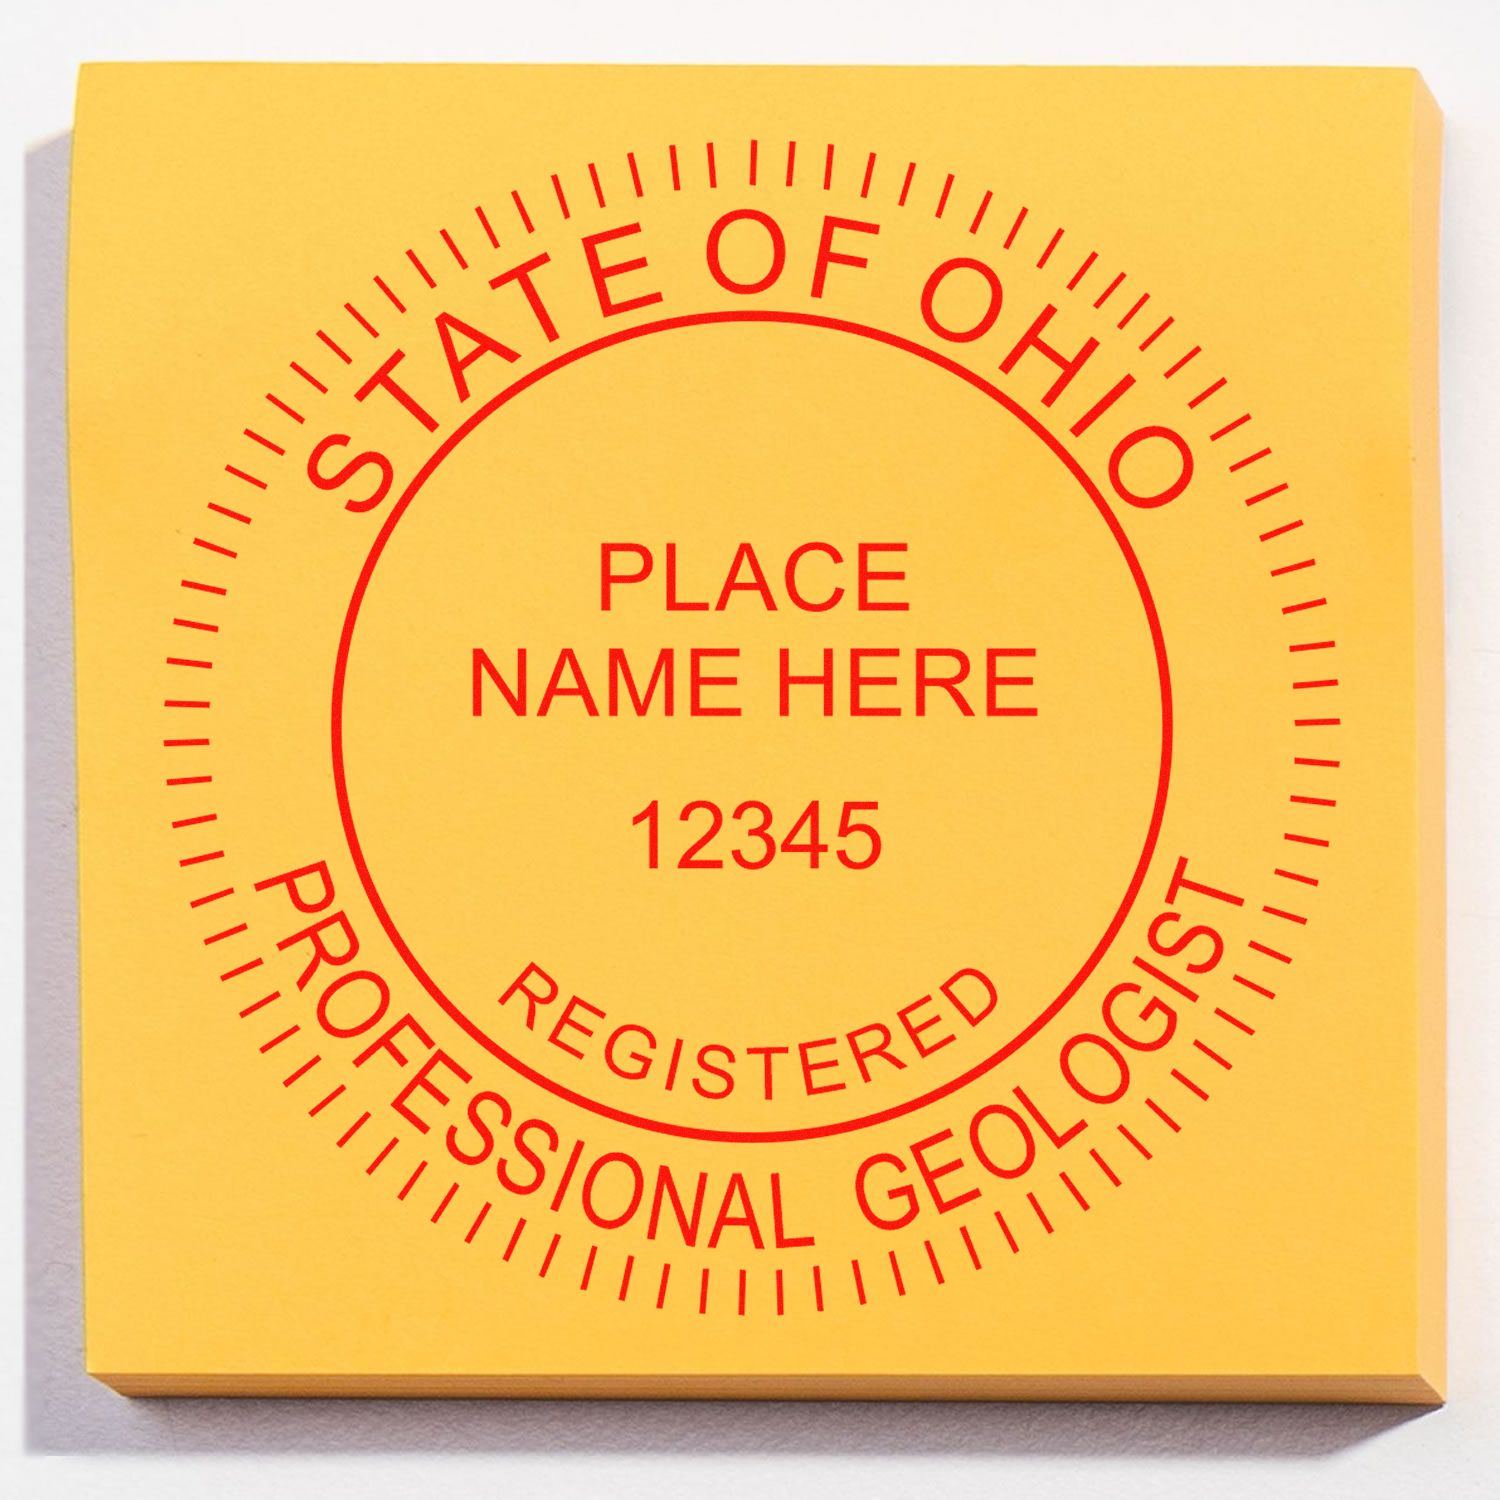 An in use photo of the Slim Pre-Inked Ohio Professional Geologist Seal Stamp showing a sample imprint on a cardstock